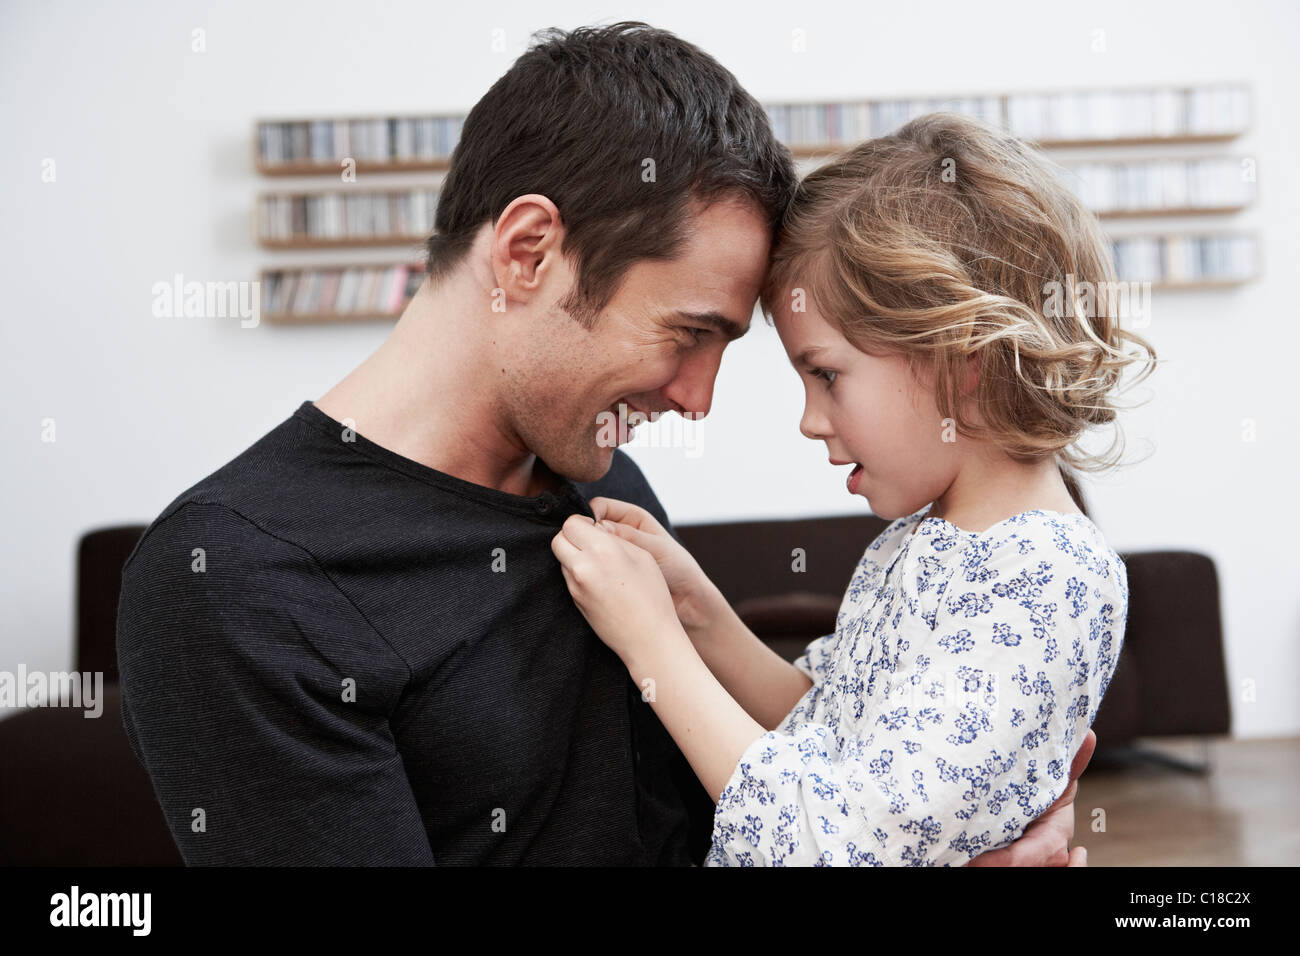 Girl buttoning up fathers shirt Stock Photo